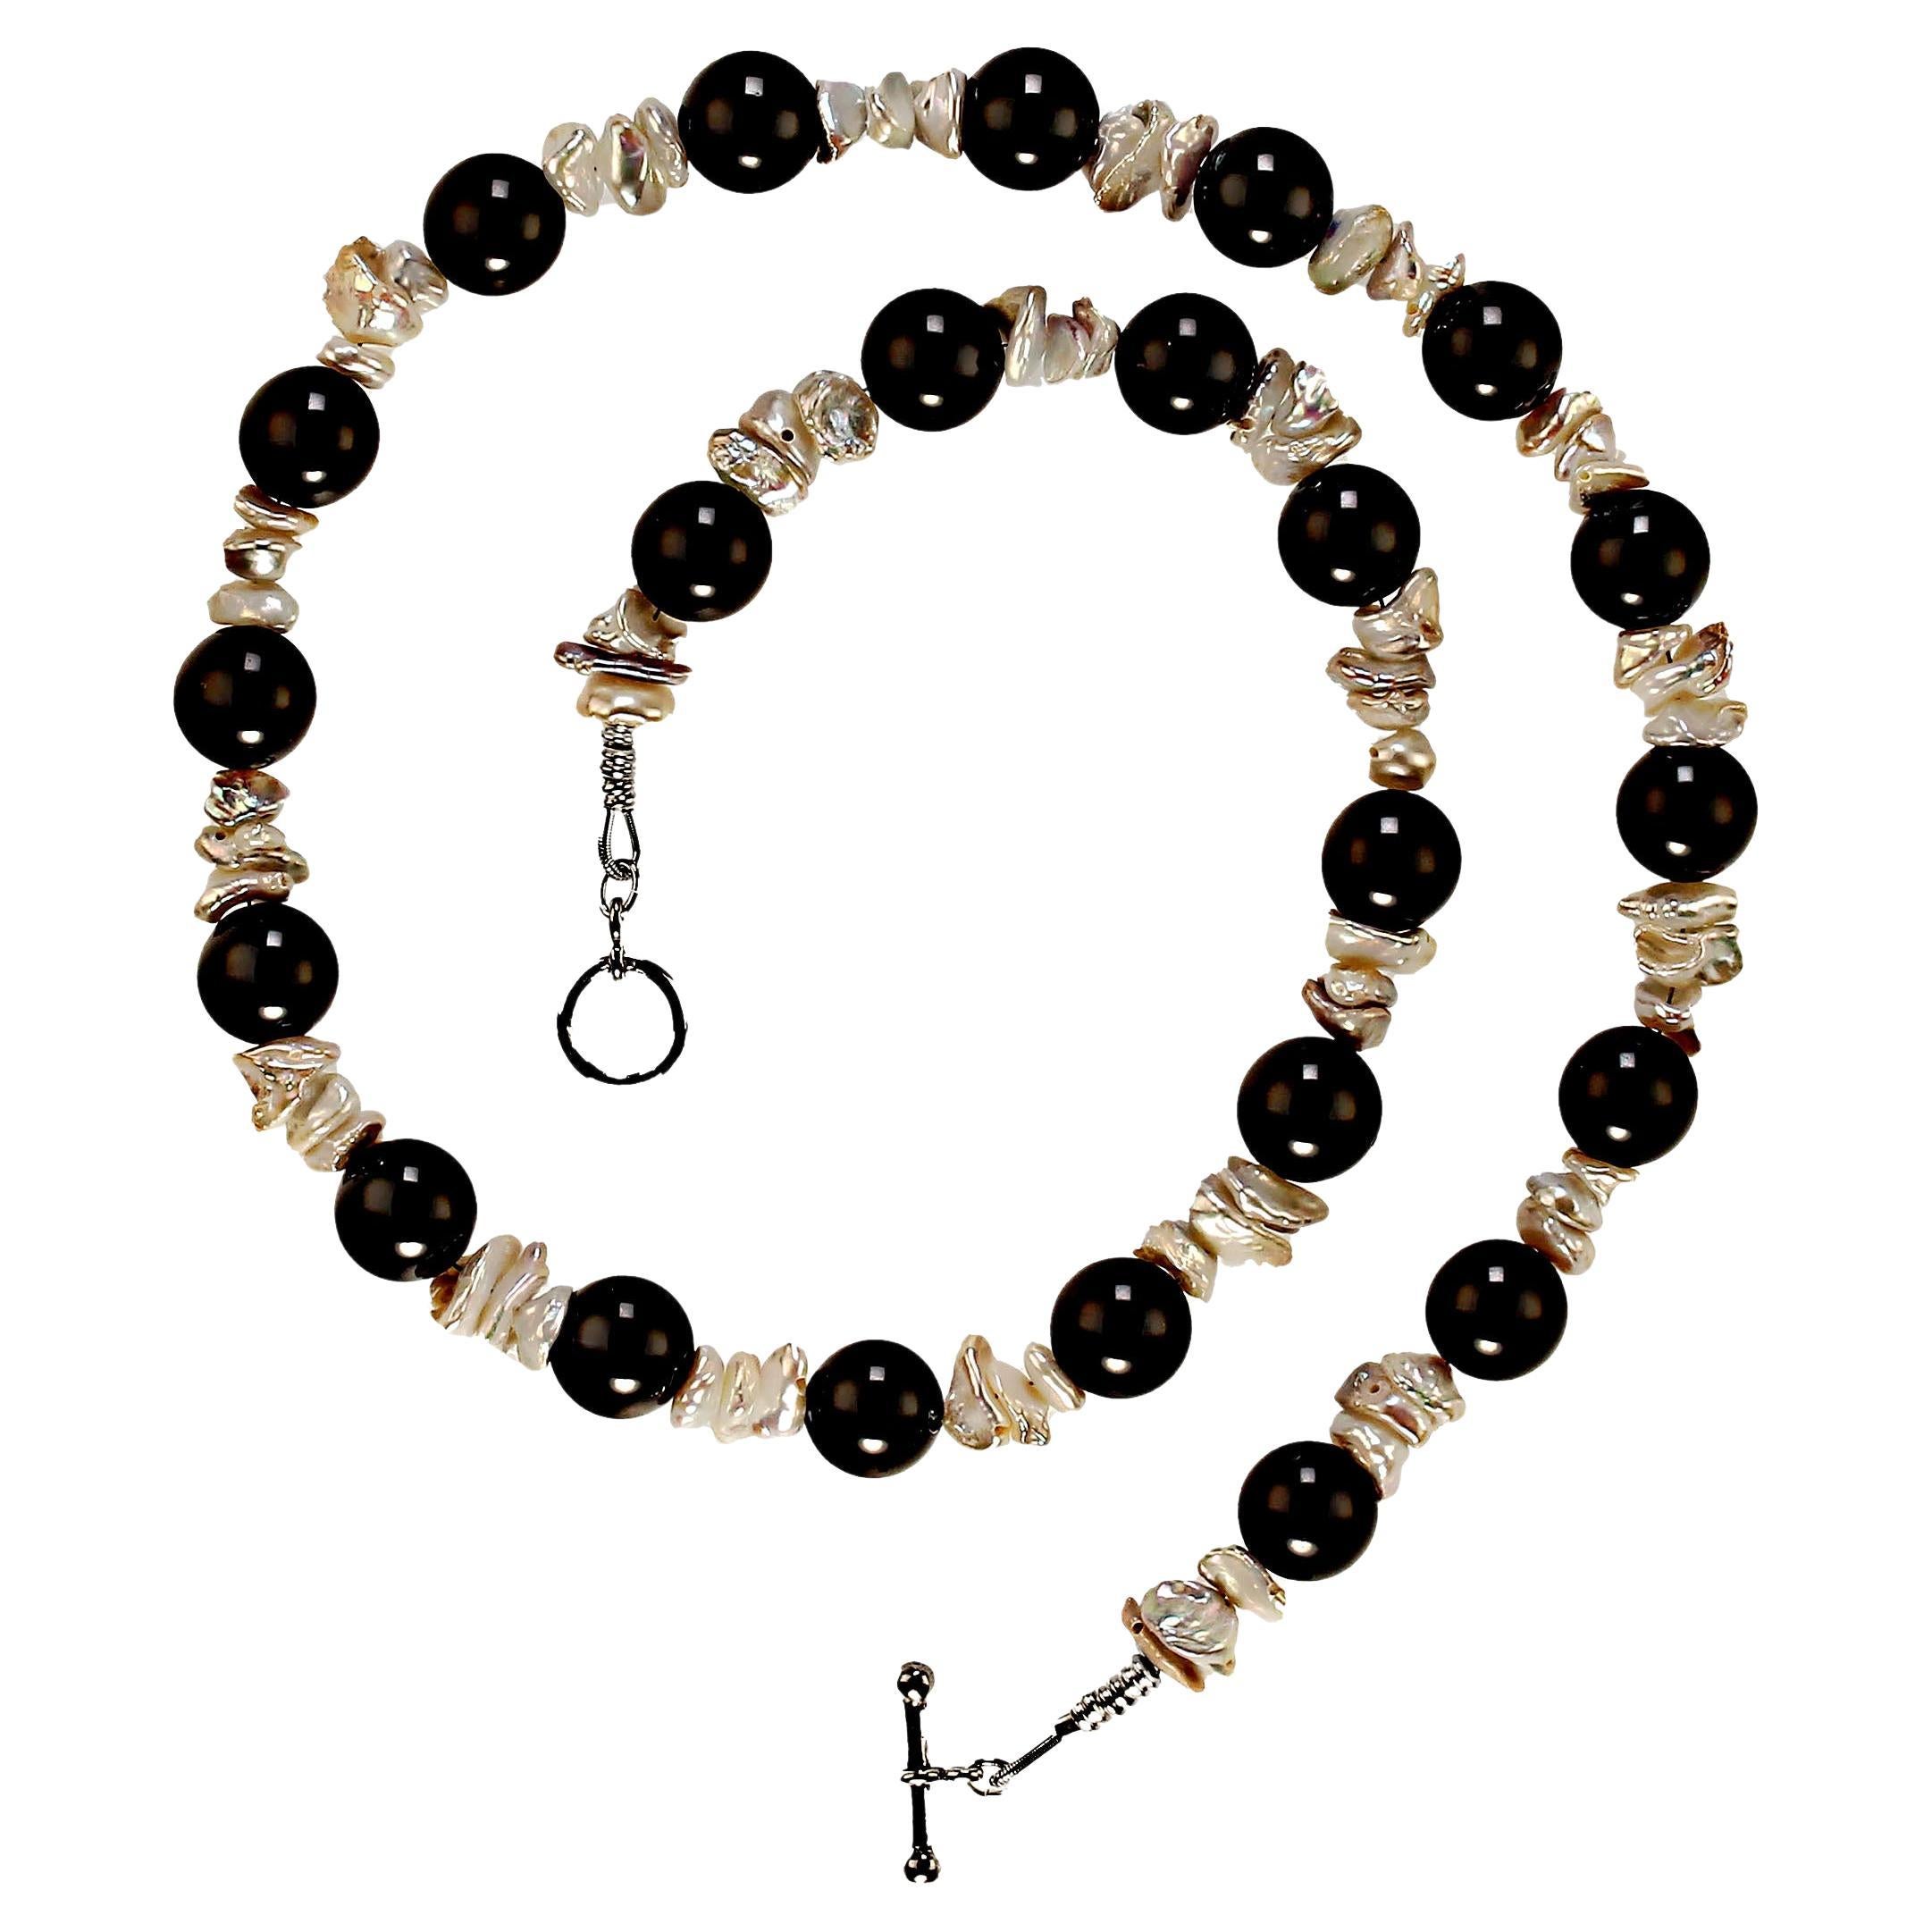 Bead AJD 20 Inch Gray Iridescent Biwa Pearl and Black Onyx necklace Great Gift! For Sale